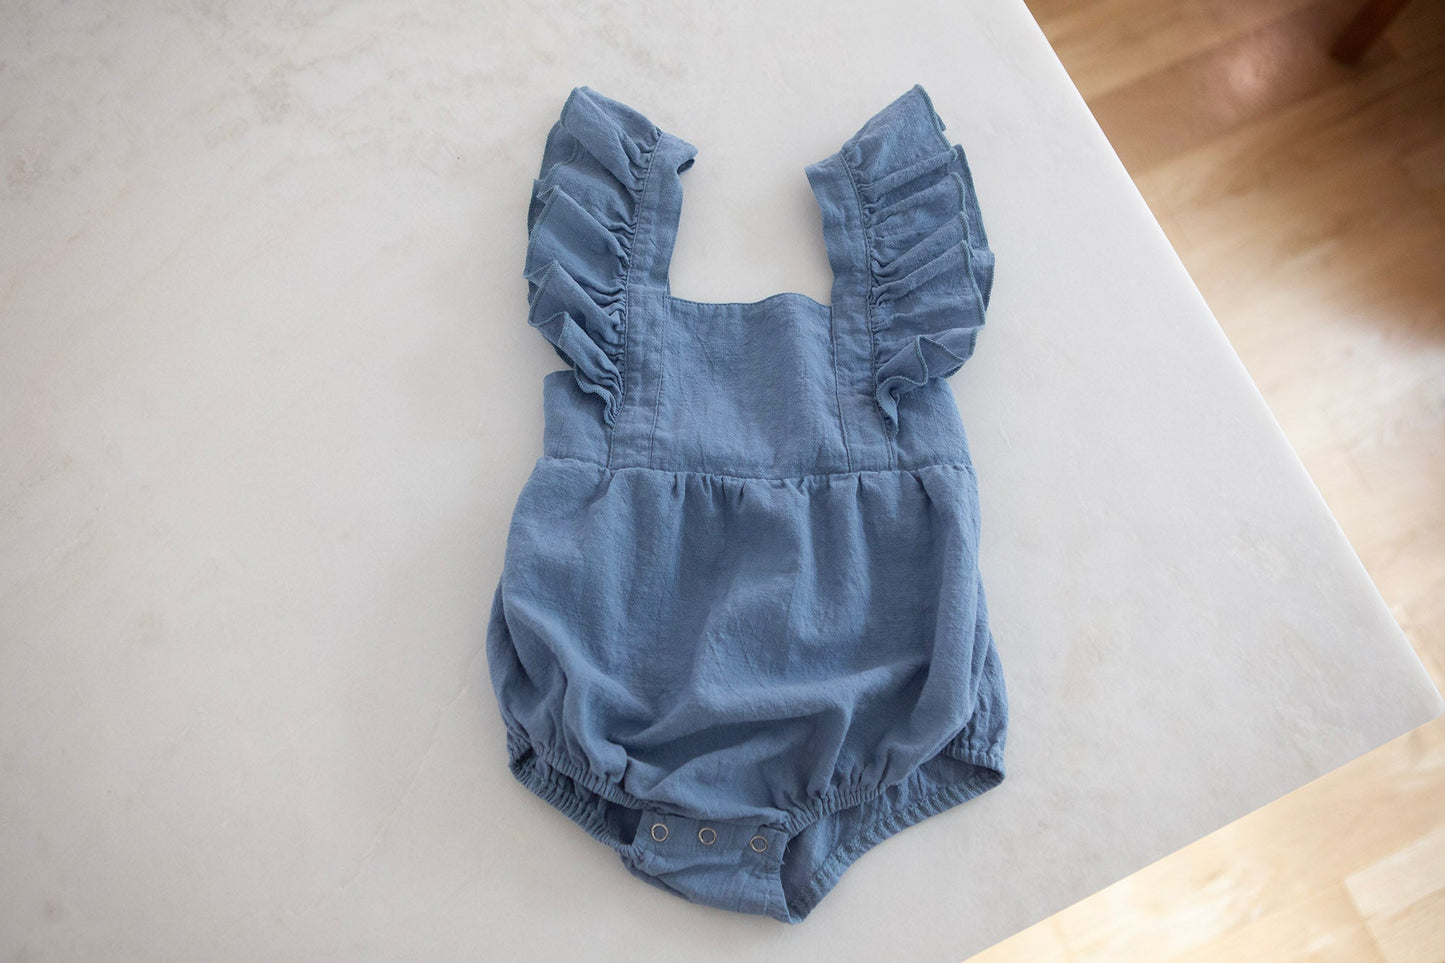 Blue Baby Girl Romper - Baby Girl One Piece Outfit - Cheerful Lane